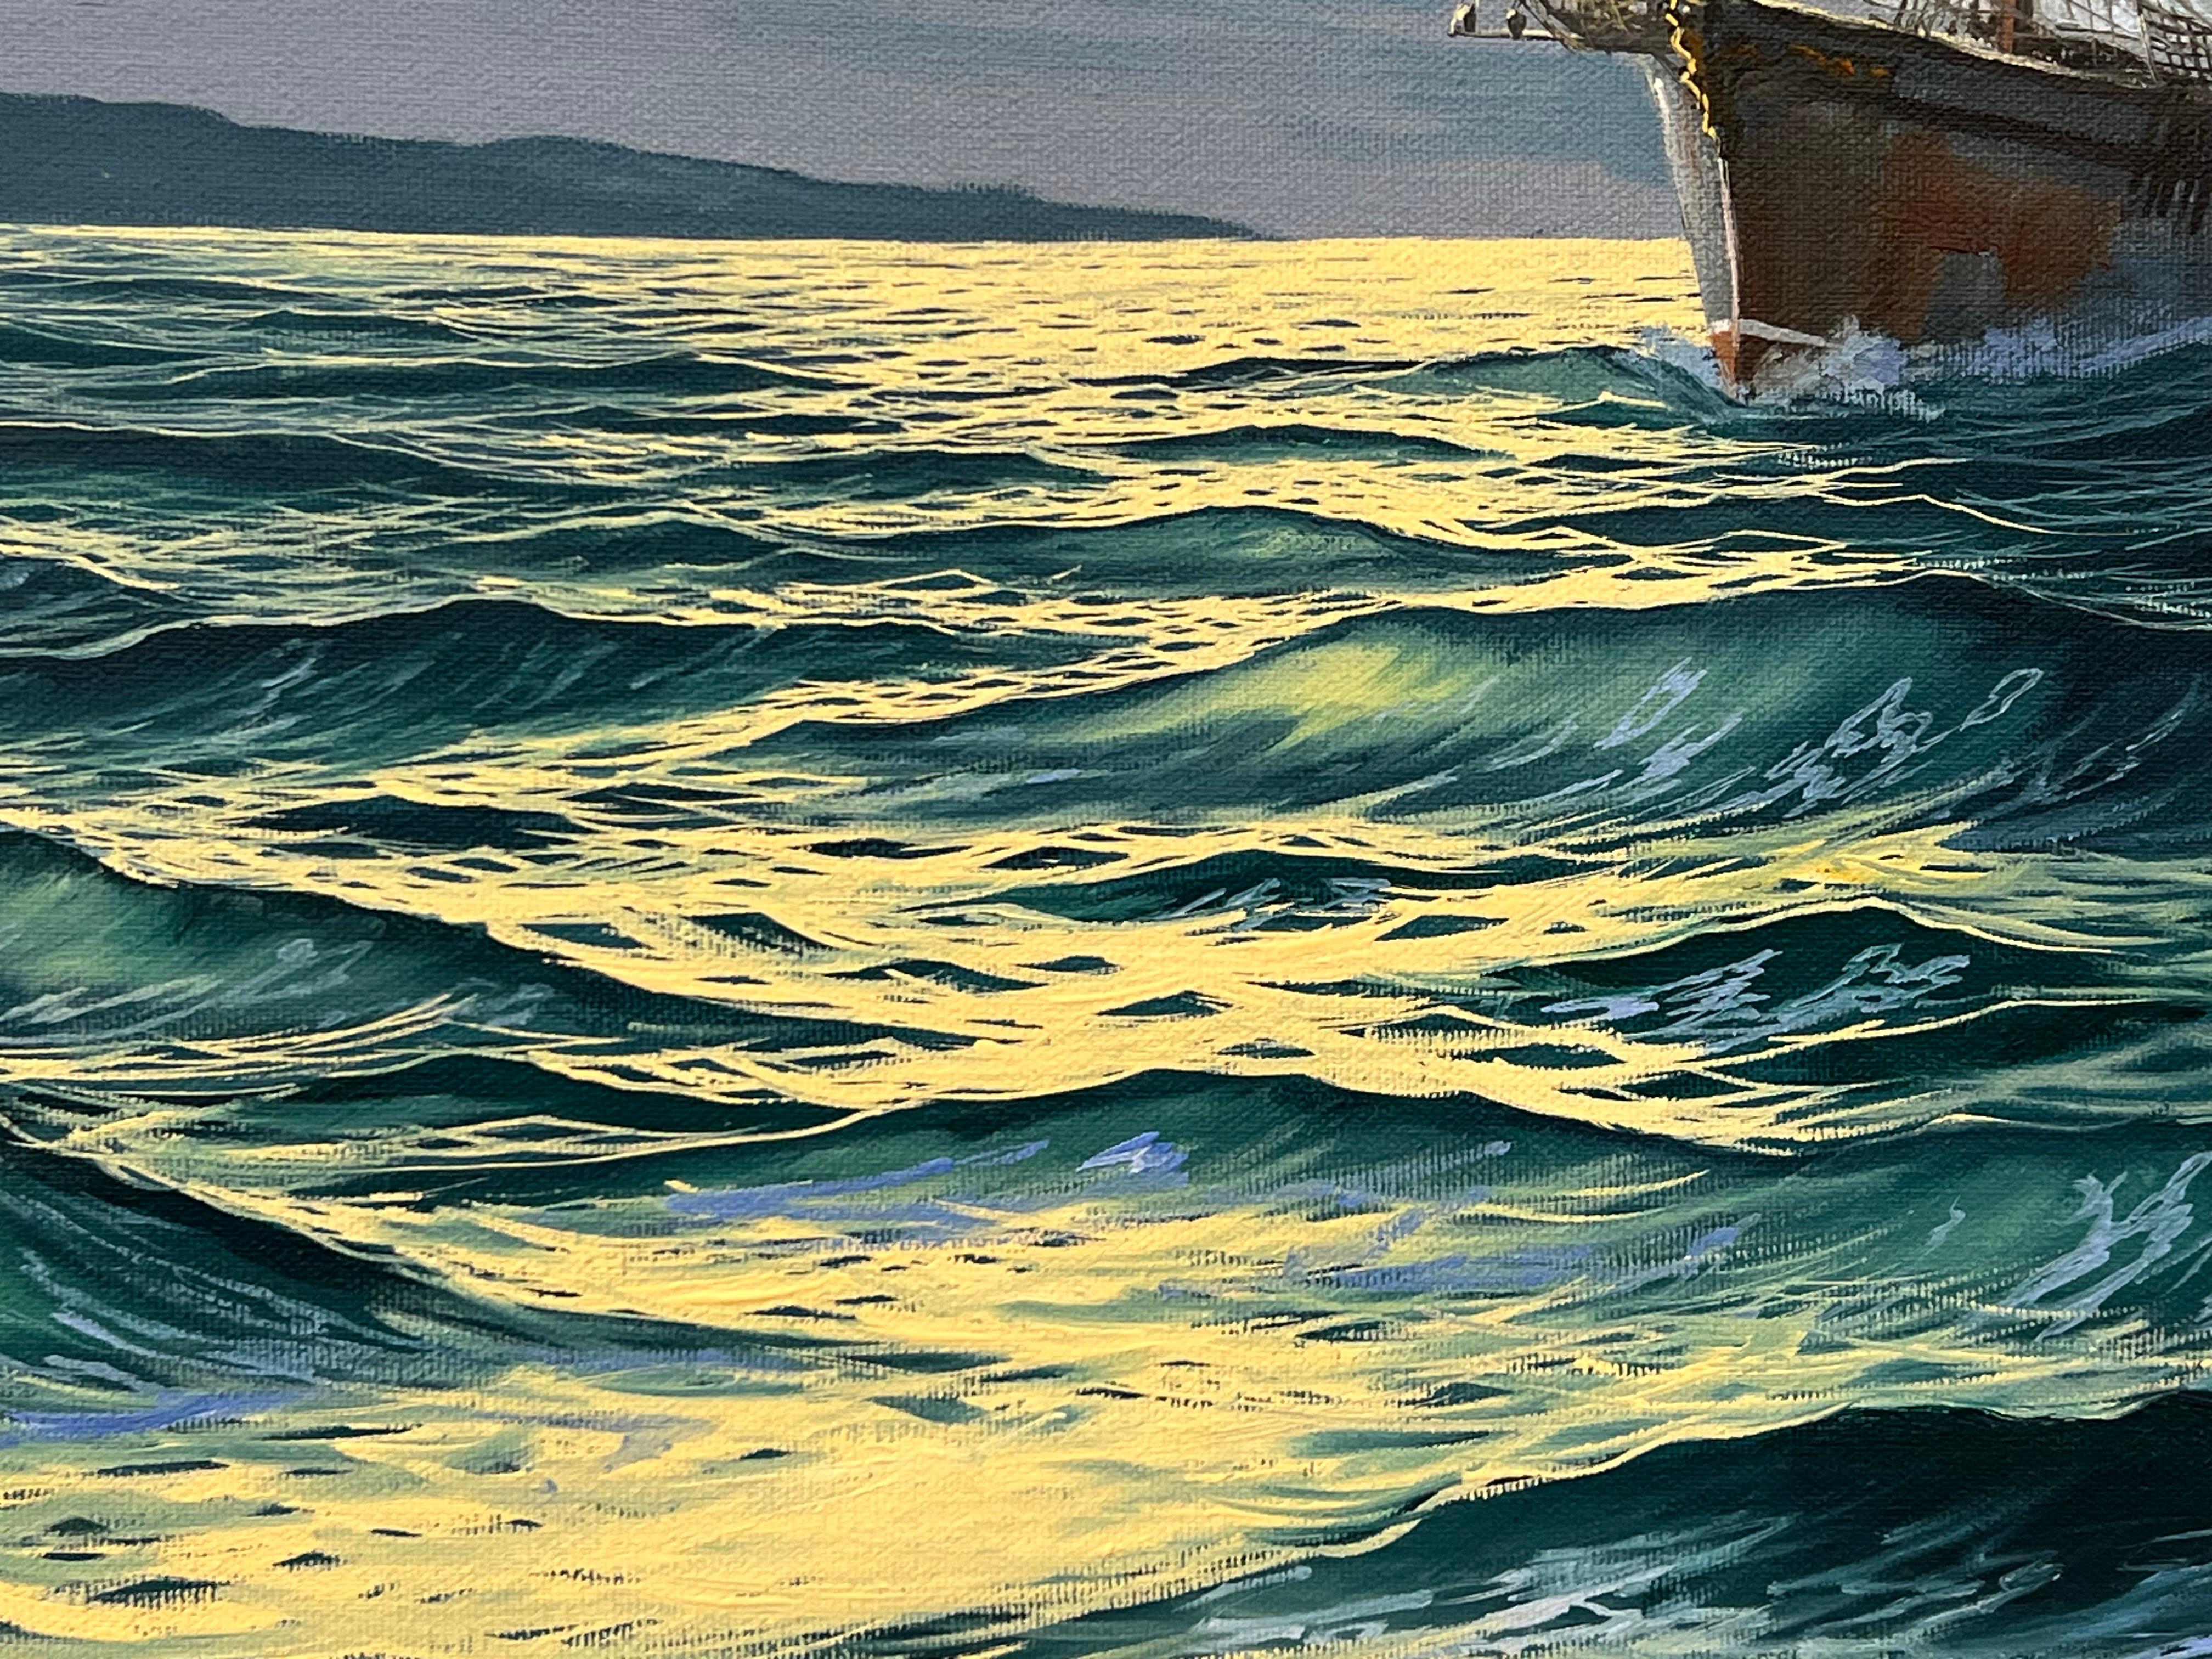 Maritime Seascape Oil Painting entitled Galleons at Sea by British Artist Keith English (1935-2016) 

Art measures 36 x 24 inches 
Unframed (framing by arrangement) 

Oil on Canvas. Signed lower right. Keith English (1935-2016) was a Spiritual,